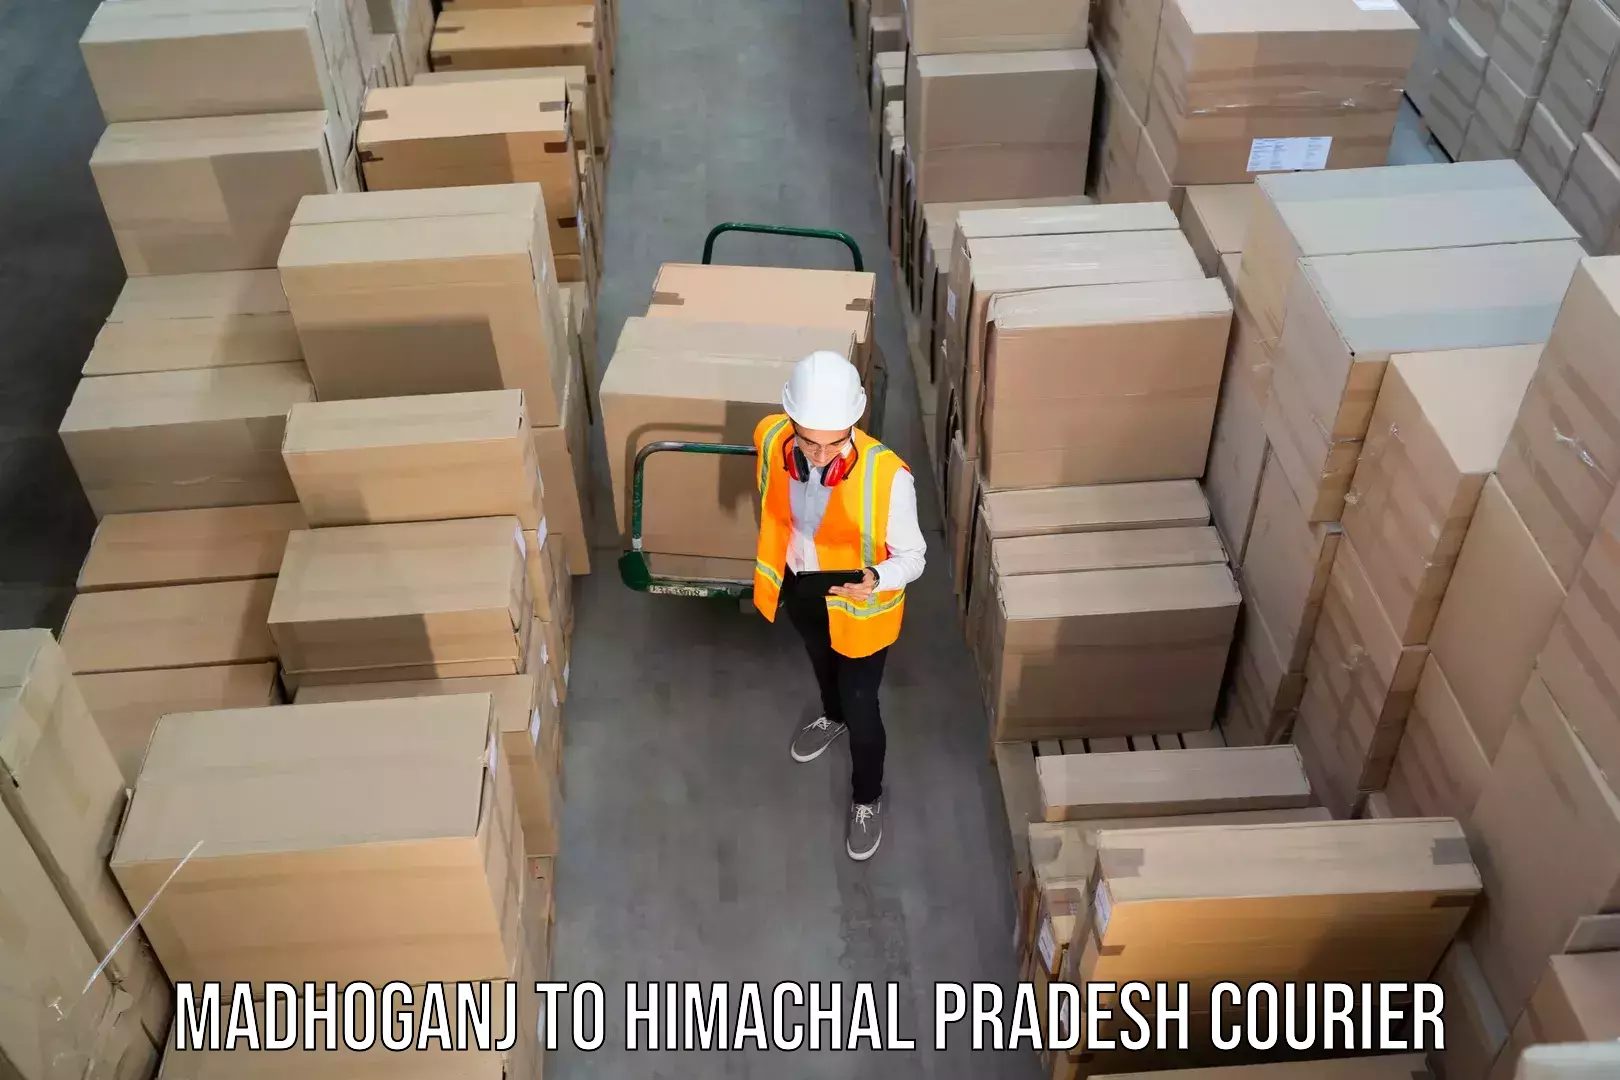 Easy access courier services in Madhoganj to Salouni